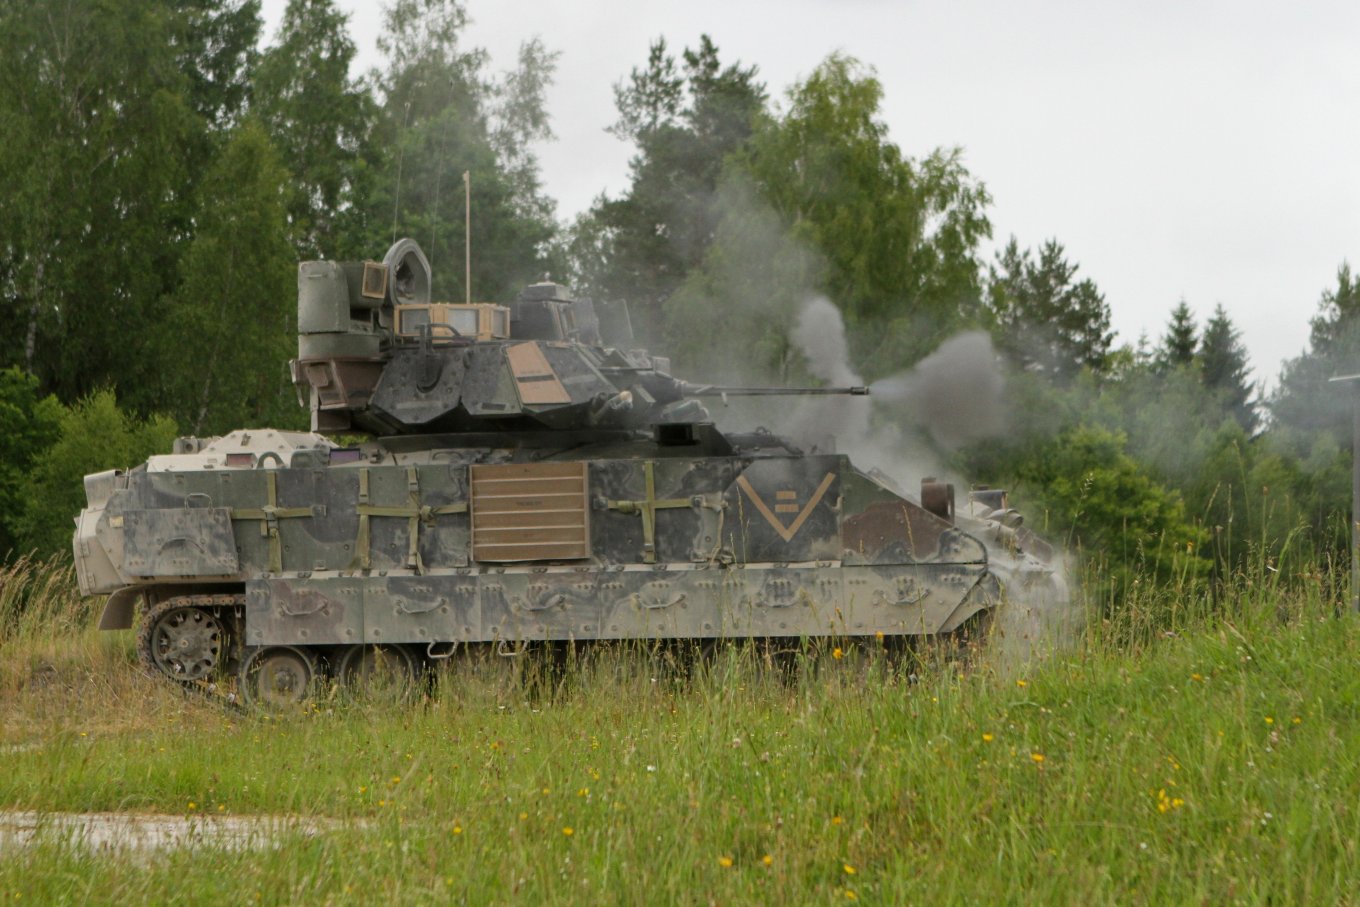 U.S. soldiers engage targets with their M2 Bradley Fighting vehicle during squad live-fire certification training as part of Exercise Combined Resolve II at the Joint Multinational Readiness Center in Hohenfels, Germany, June 20, 2014 Defense Express The U.S. Provides Critical Security Assistance to Ukraine, Allocating Over $325 Million in Weaponry